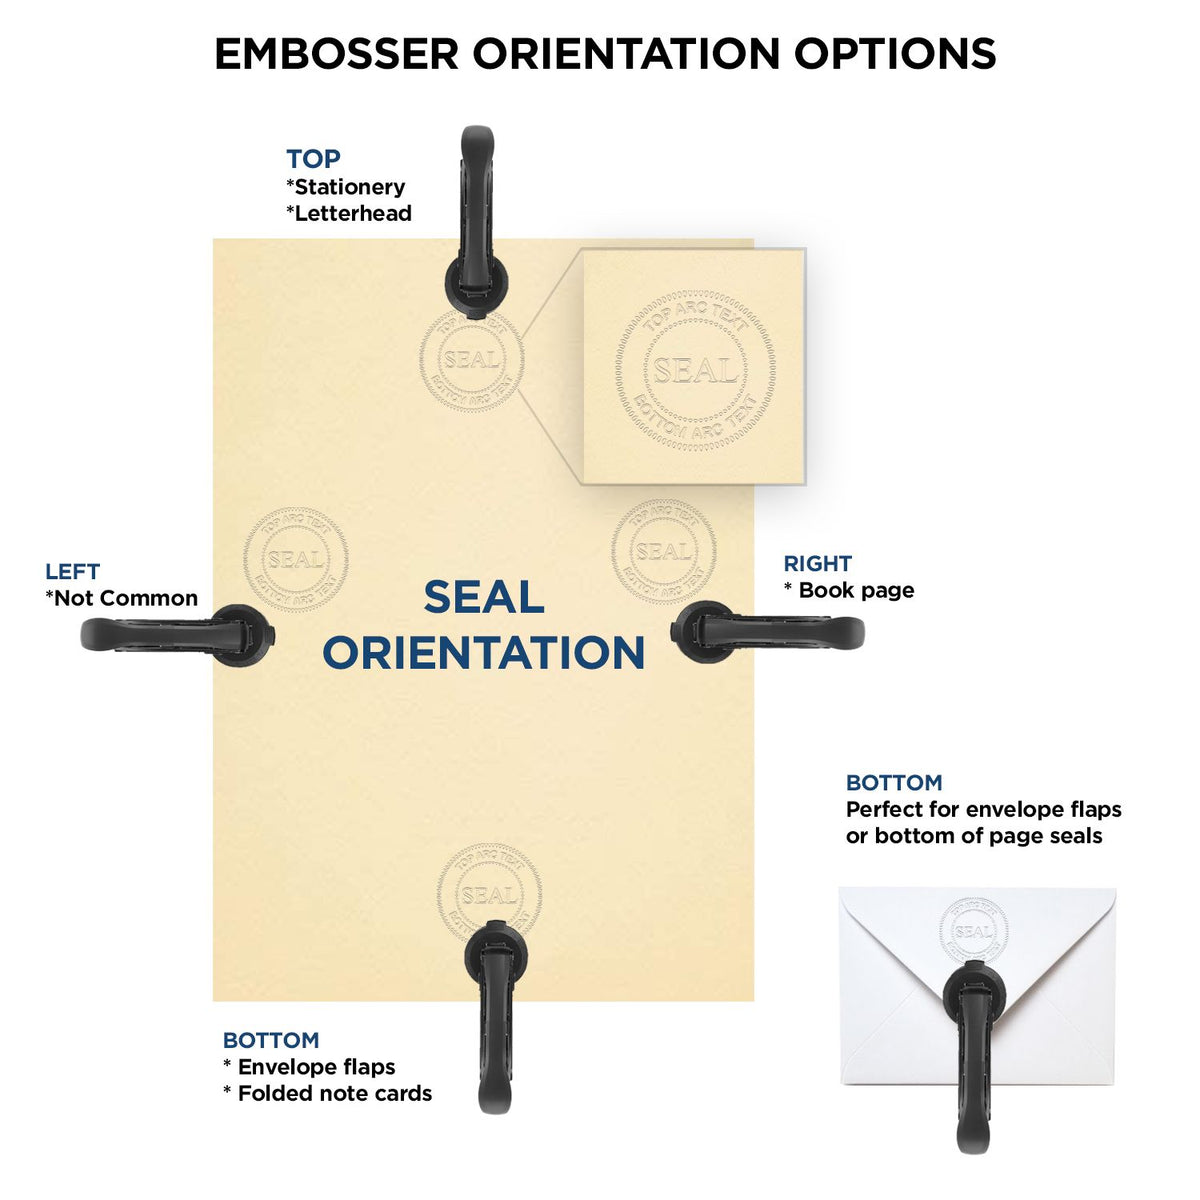 An infographic for the State of South Dakota Extended Long Reach Geologist Seal showing embosser orientation, this is showing examples of a top, bottom, right and left insert.